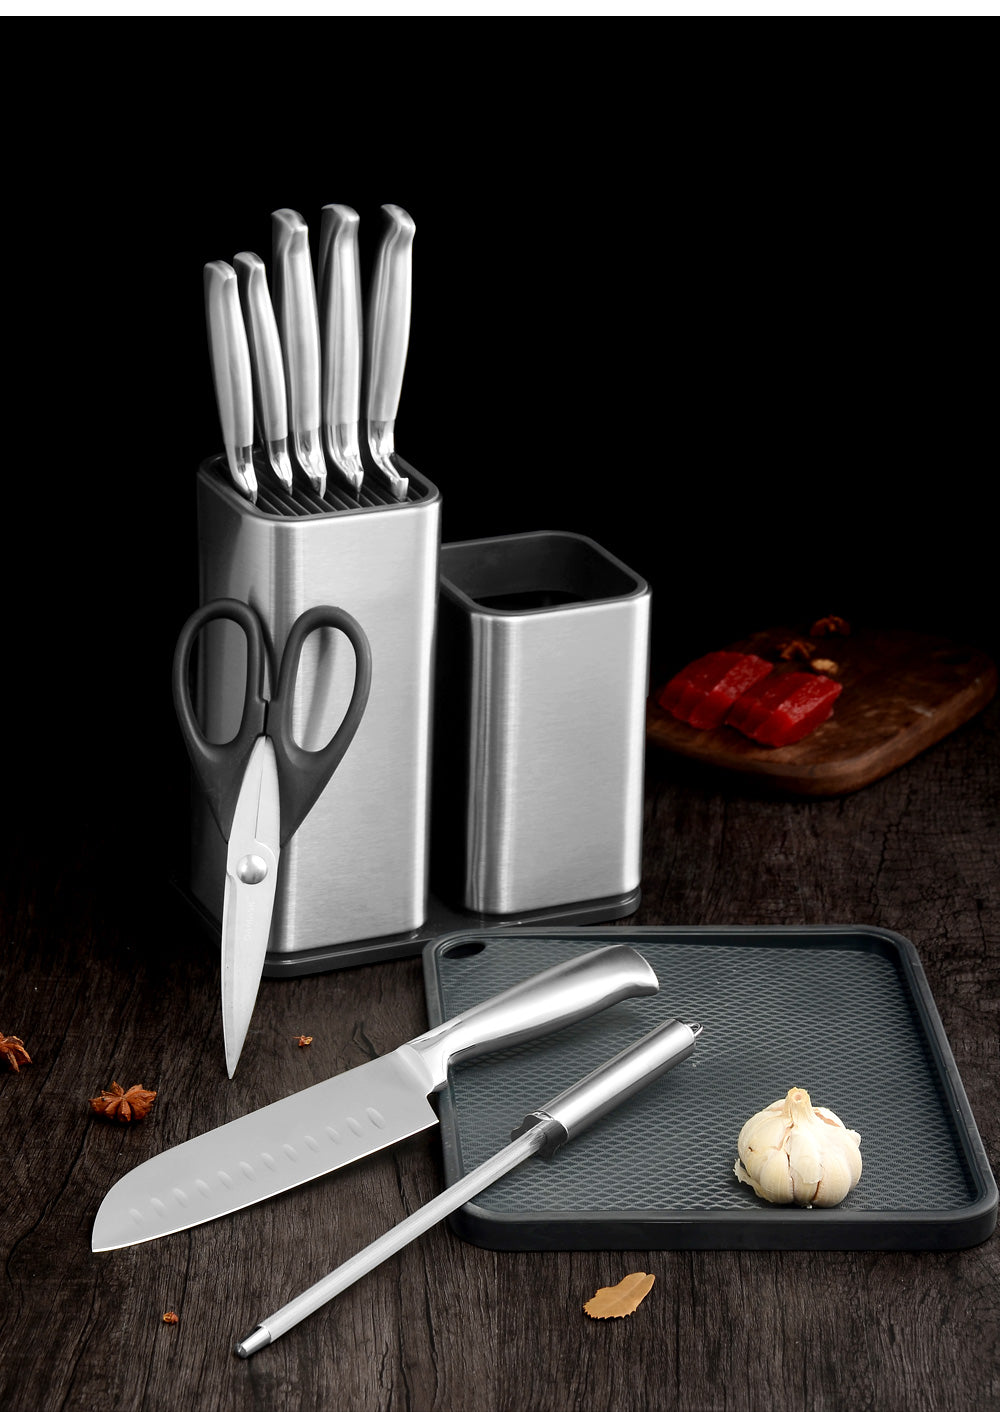 Stainless Steel Knife Holder Stand Multi-options Color Ceramic Knives Storage Kitchen Block Tools - Knife Depot Co.